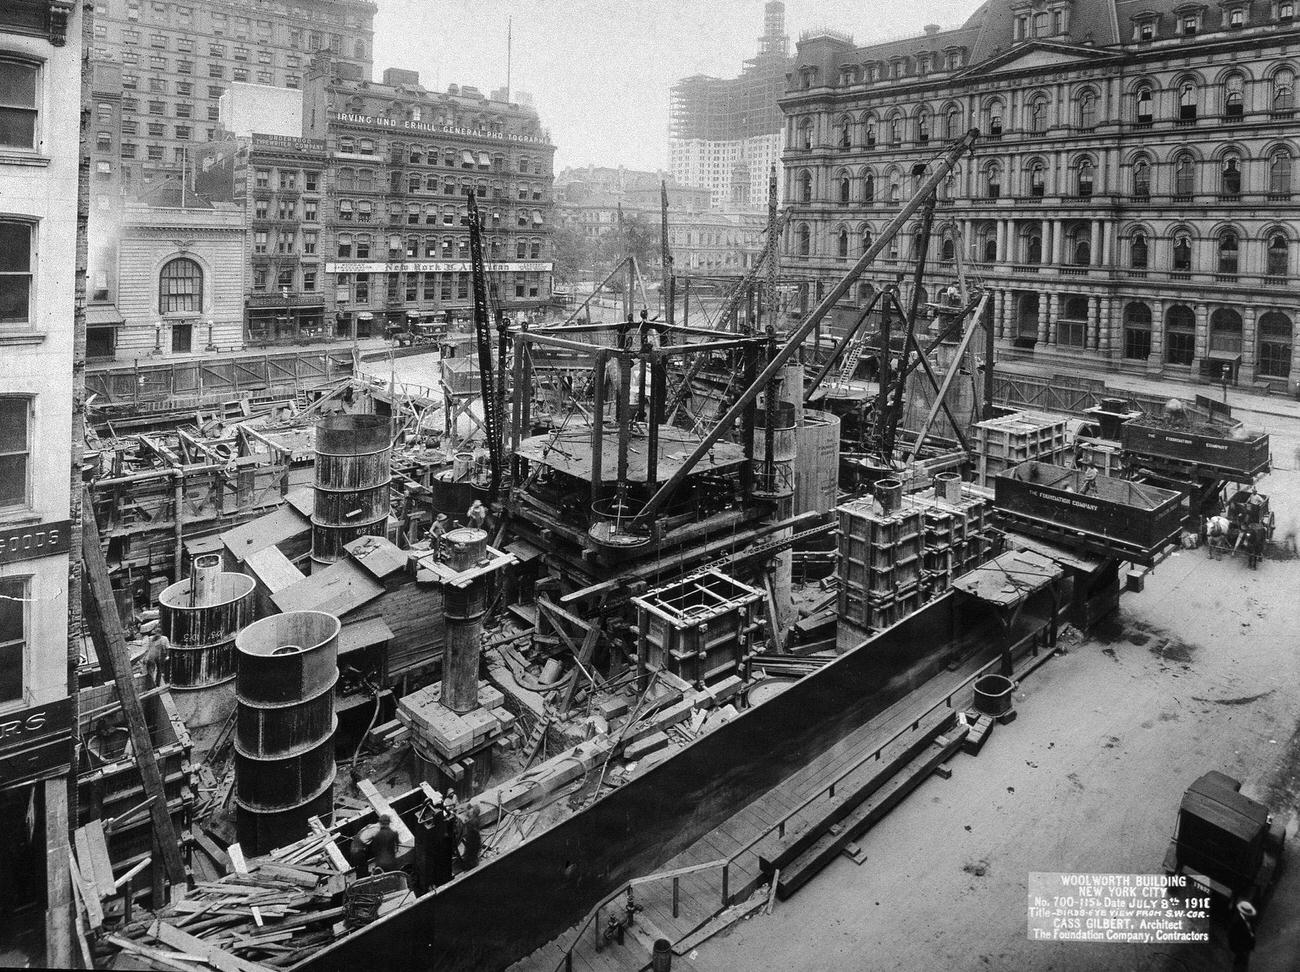 Aerial View Of The Woolworth Building Construction Site From The Southwest Corner, 1910